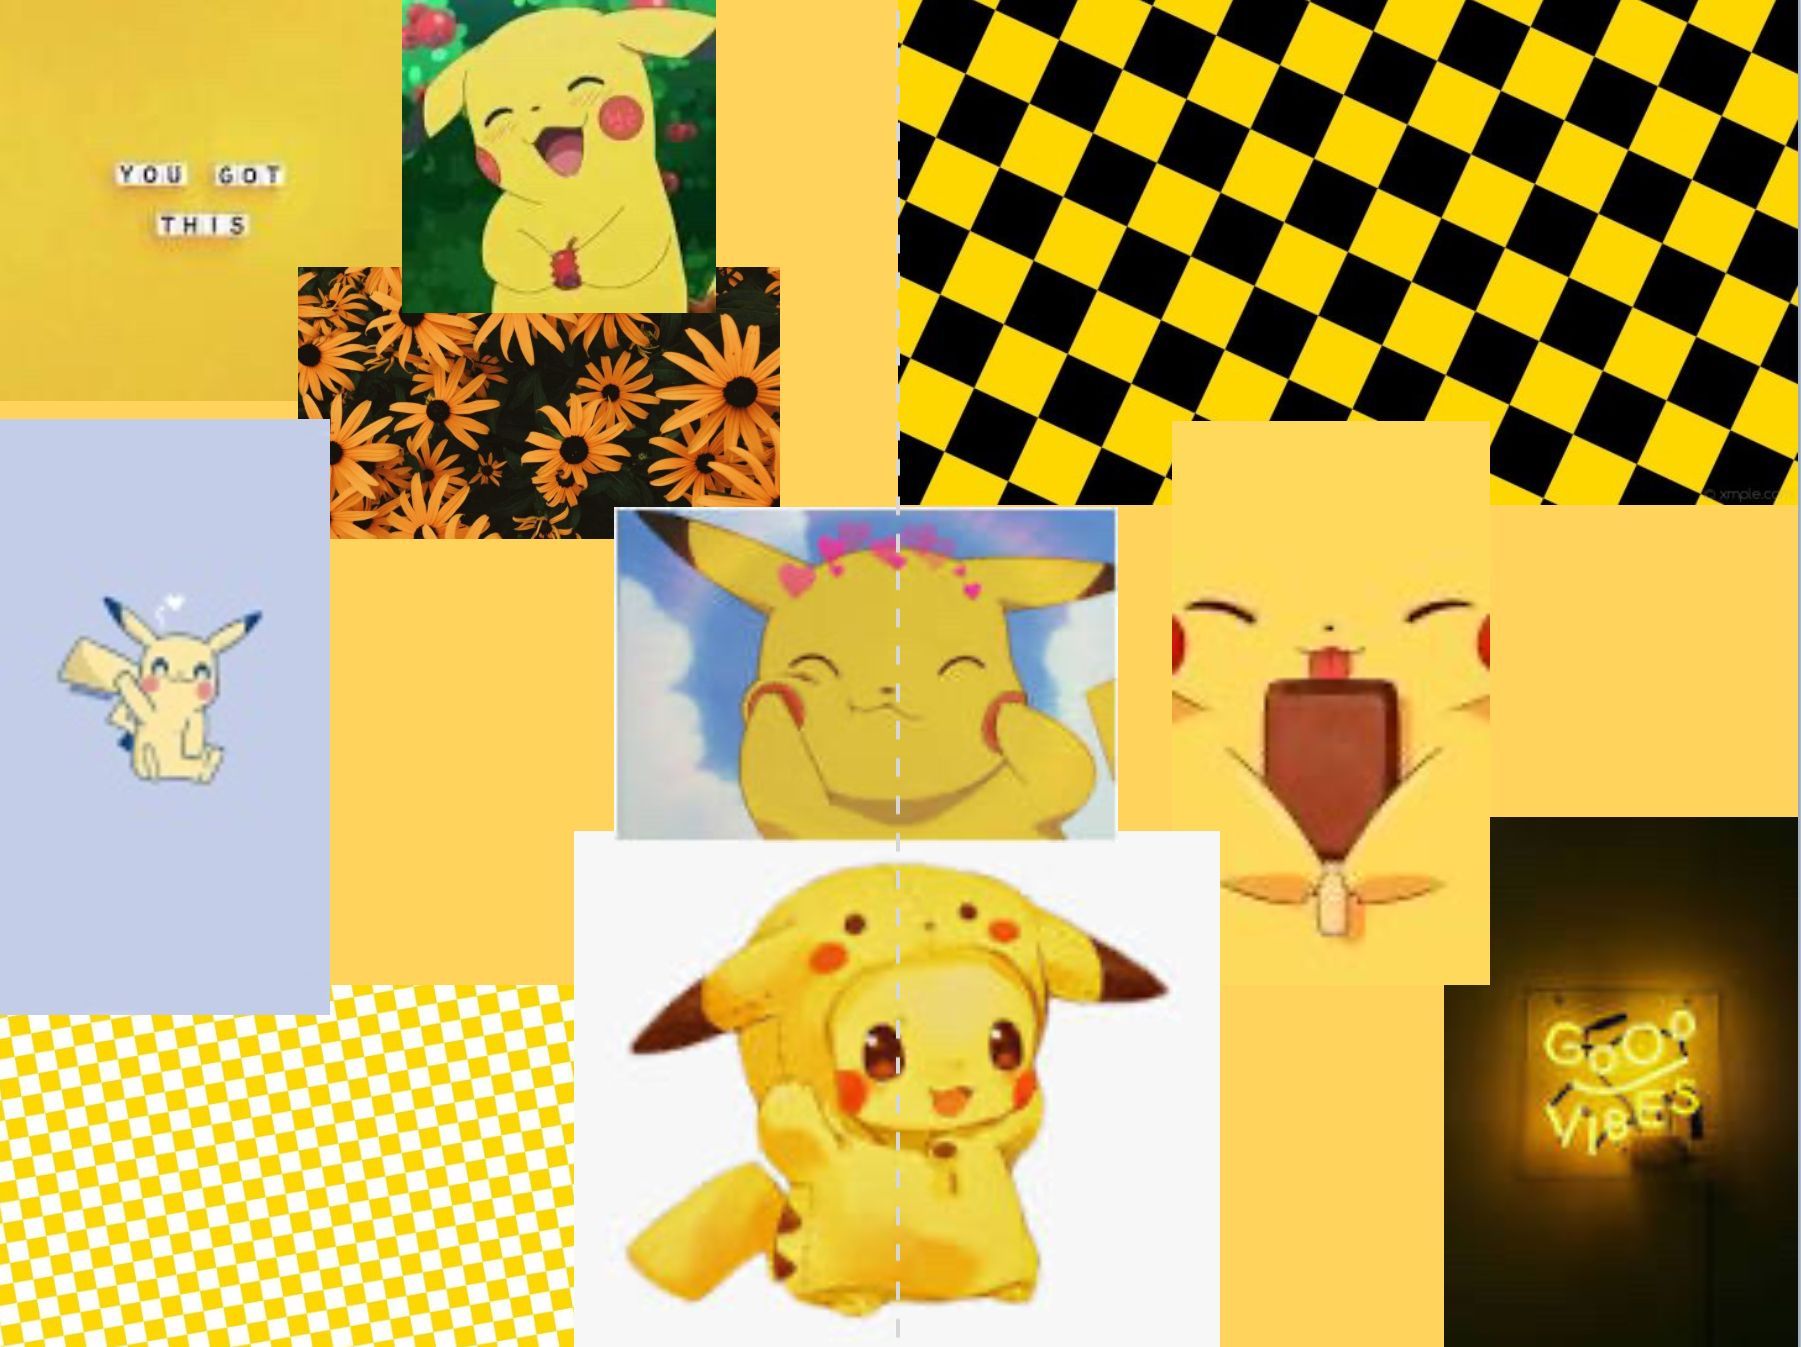 Aesthetic background with Pikachu and the words 